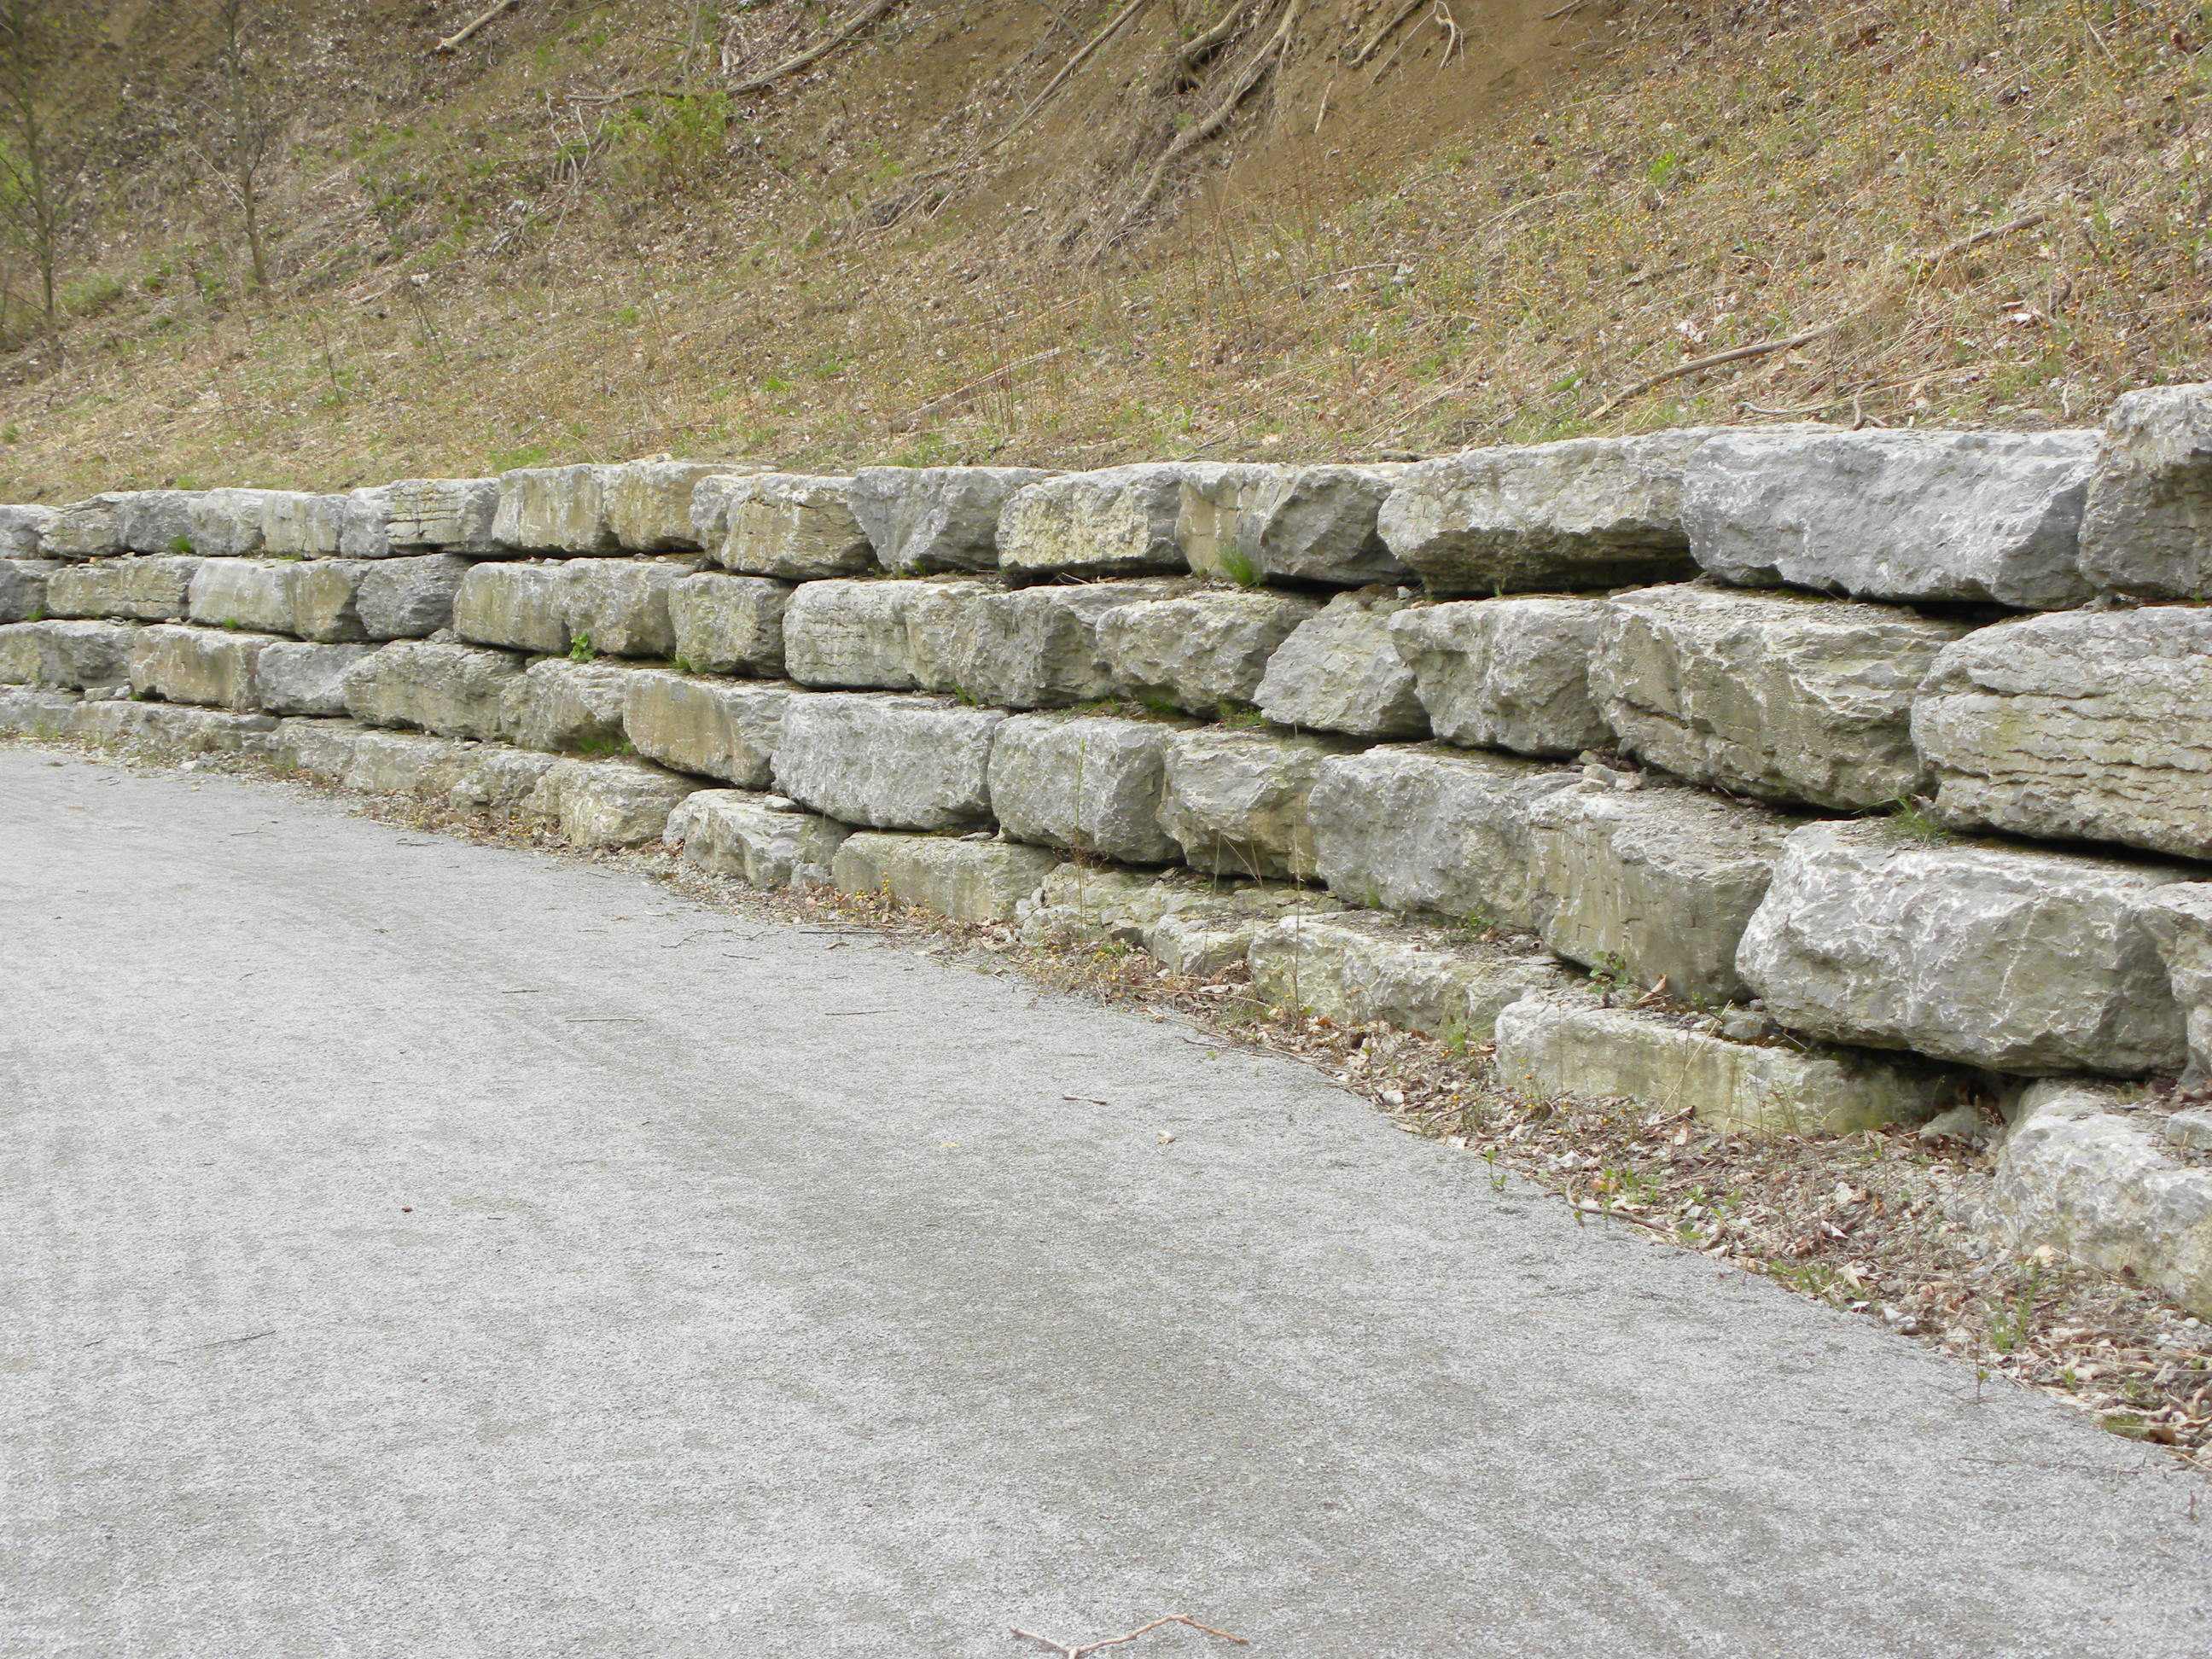 Armour wall along roadway_4940